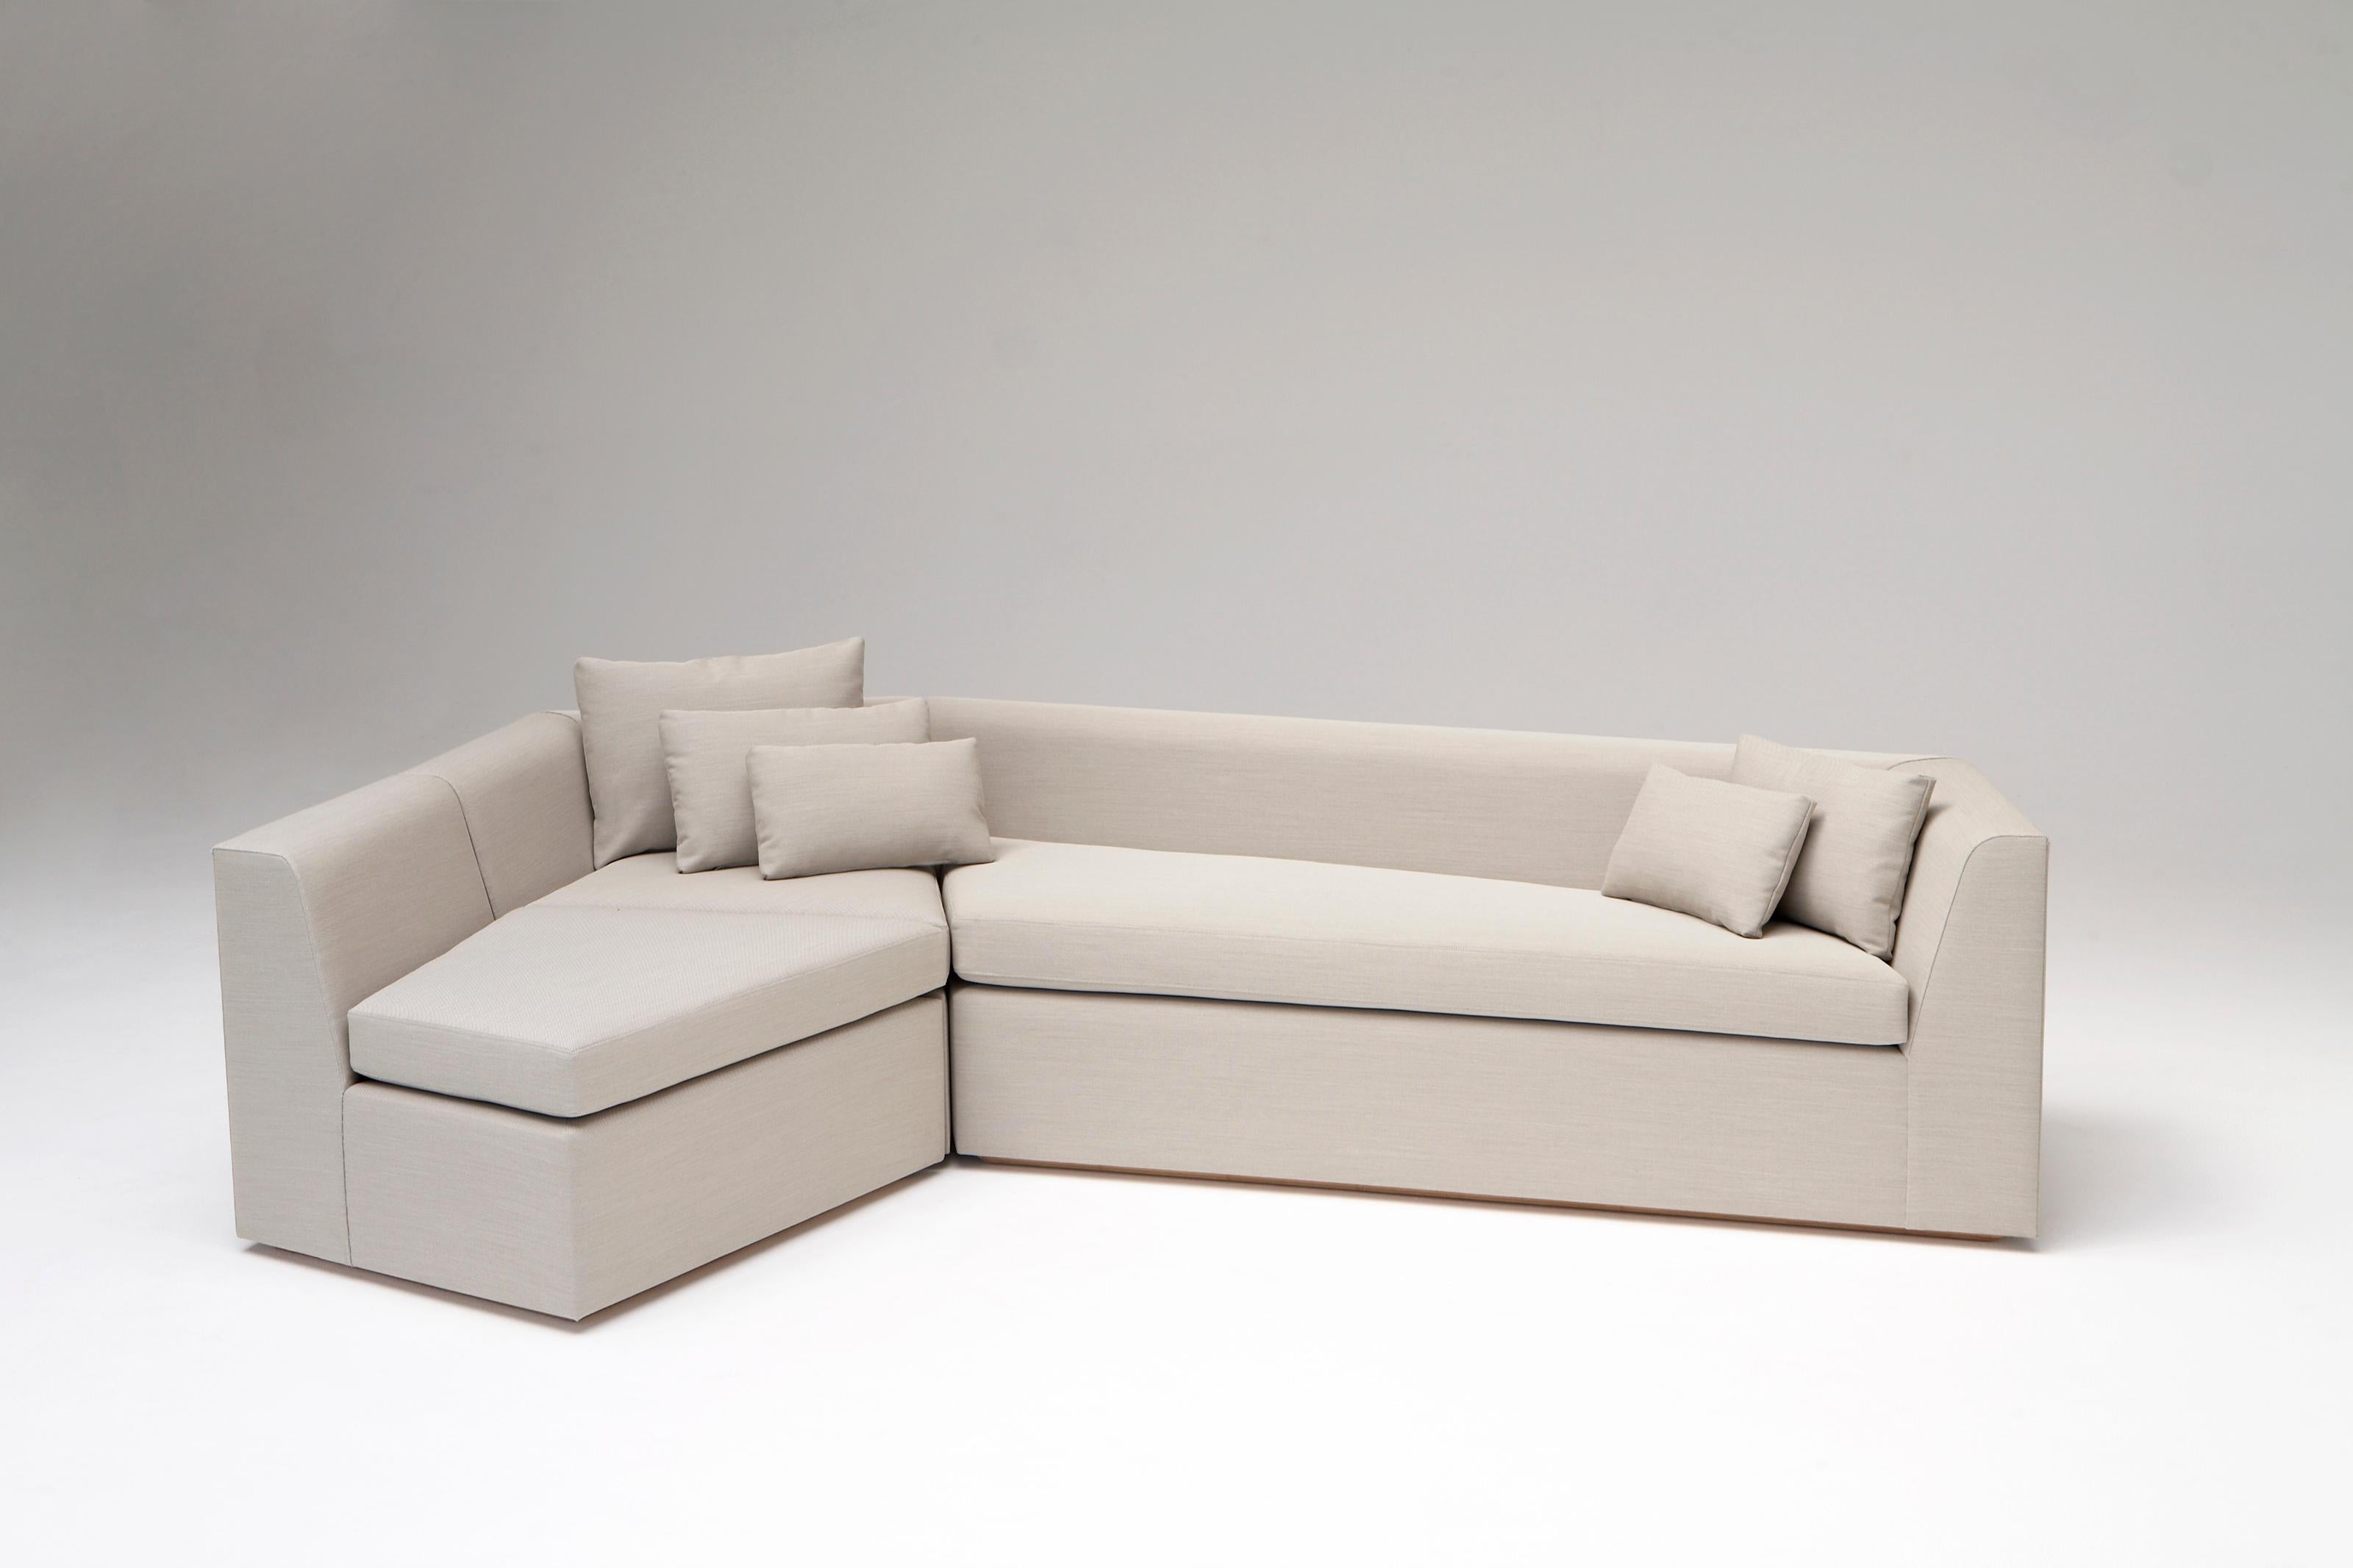 Set Of 3 Pangaea Sectional Seating by Phase Design
Dimensions: D 175.9 x W 274.3 x H 63.5 cm. 
Materials: Birch wood and upholstery. 

Hardwood construction with upholstered body and birch base. Upholstery may be sourced in the Customer's Own